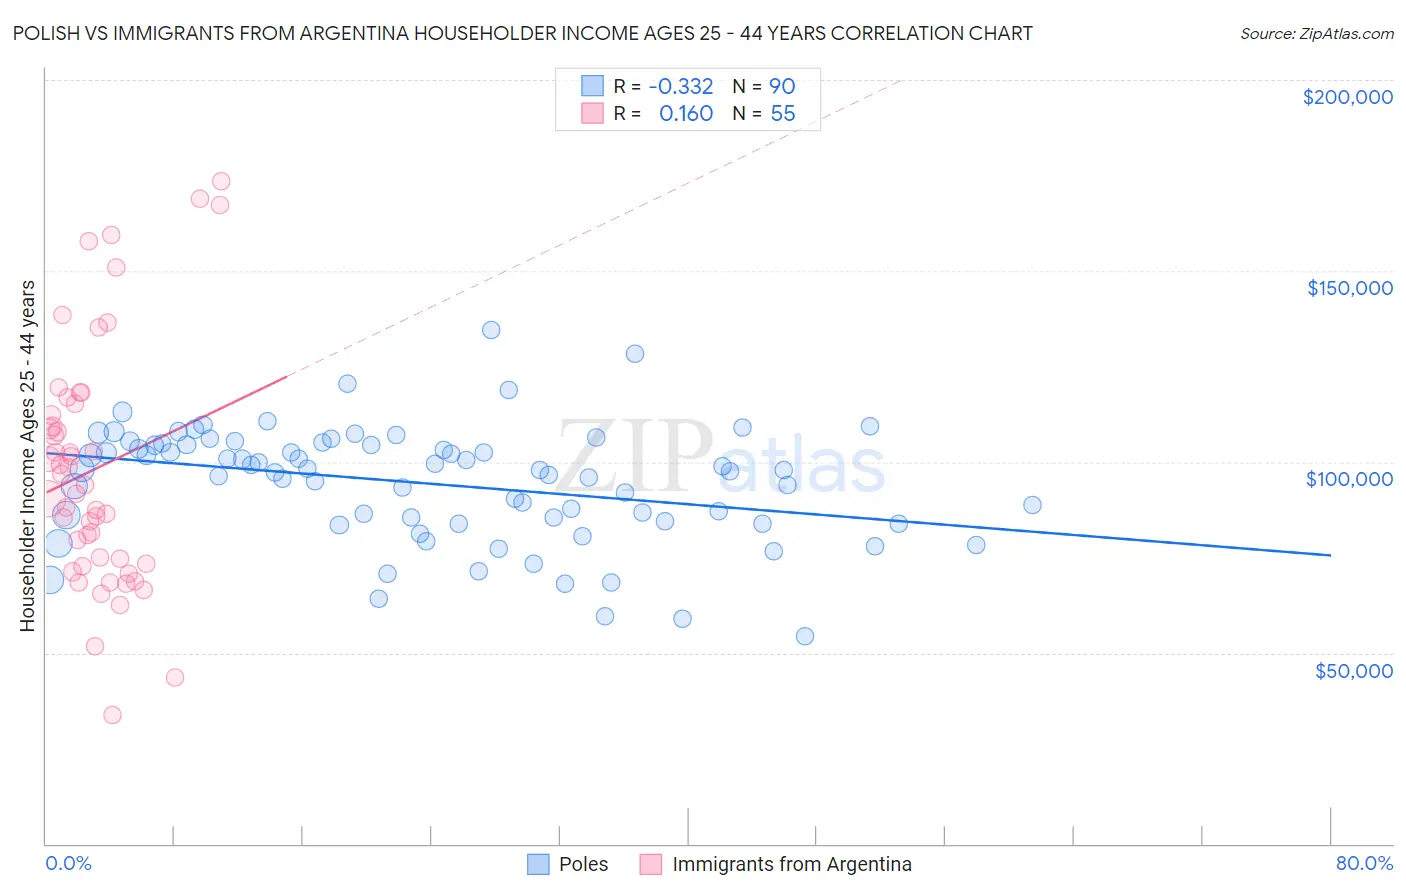 Polish vs Immigrants from Argentina Householder Income Ages 25 - 44 years